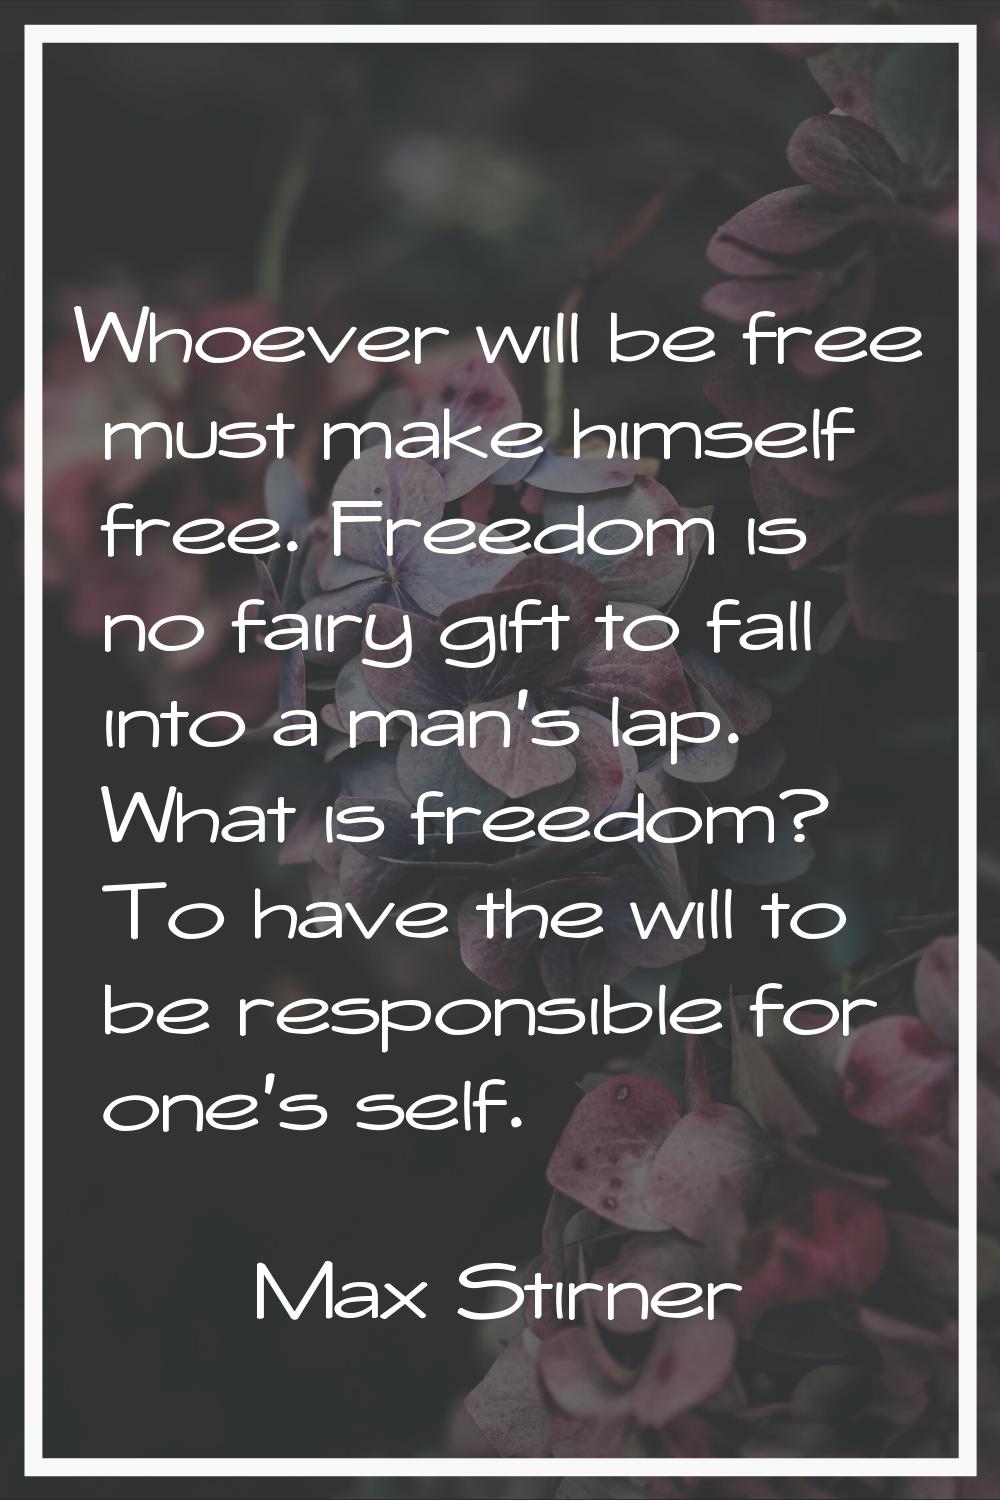 Whoever will be free must make himself free. Freedom is no fairy gift to fall into a man's lap. Wha